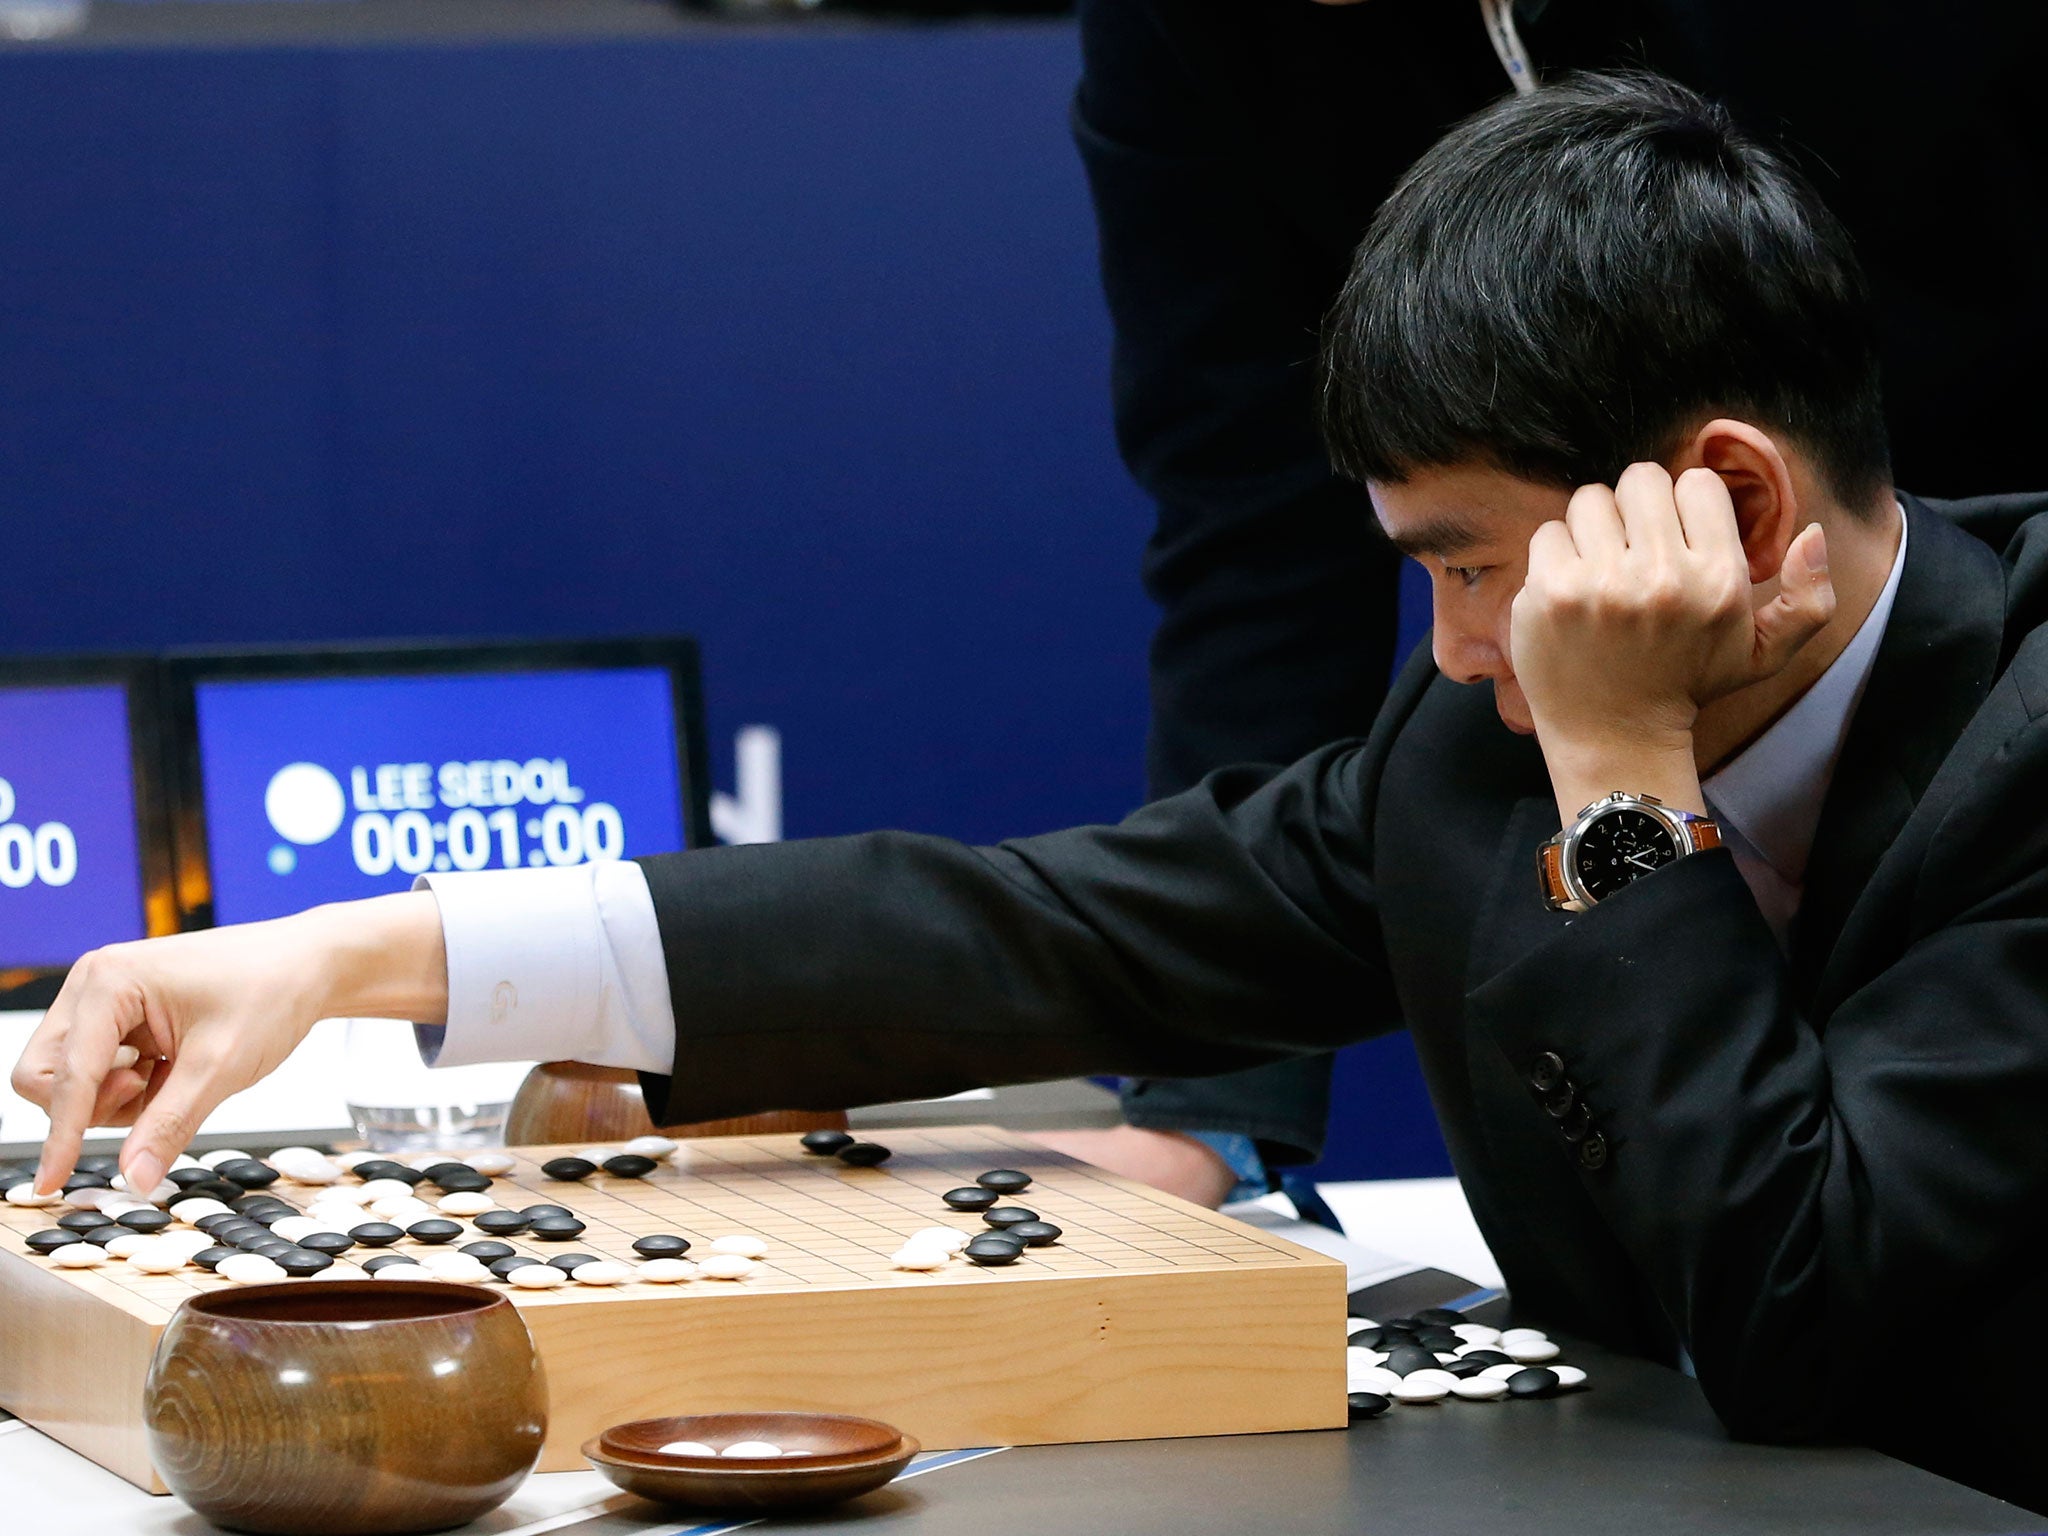 Lee Sedol V Alphago Human Beats Computer In Chinese Board Game For The First Time The Independent The Independent,Mason Jar Terrarium Ideas